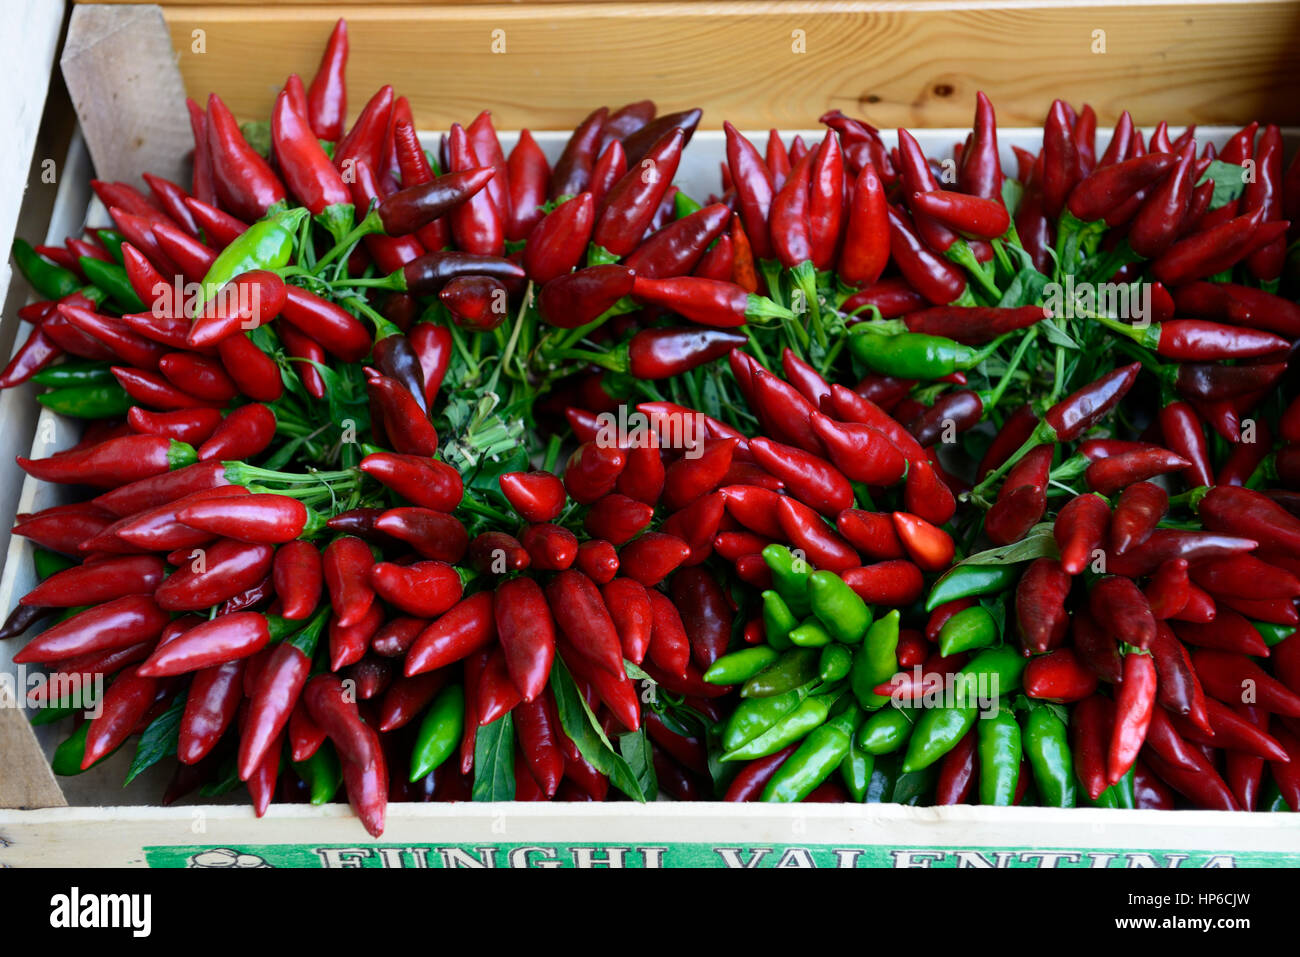 bouquet di peperoncini, Bouquet di piccoli peperoncini rossi, red chilli peppers, hot spice, whole, peppers, pisa market, tuscan produce, tuscany, foo Stock Photo